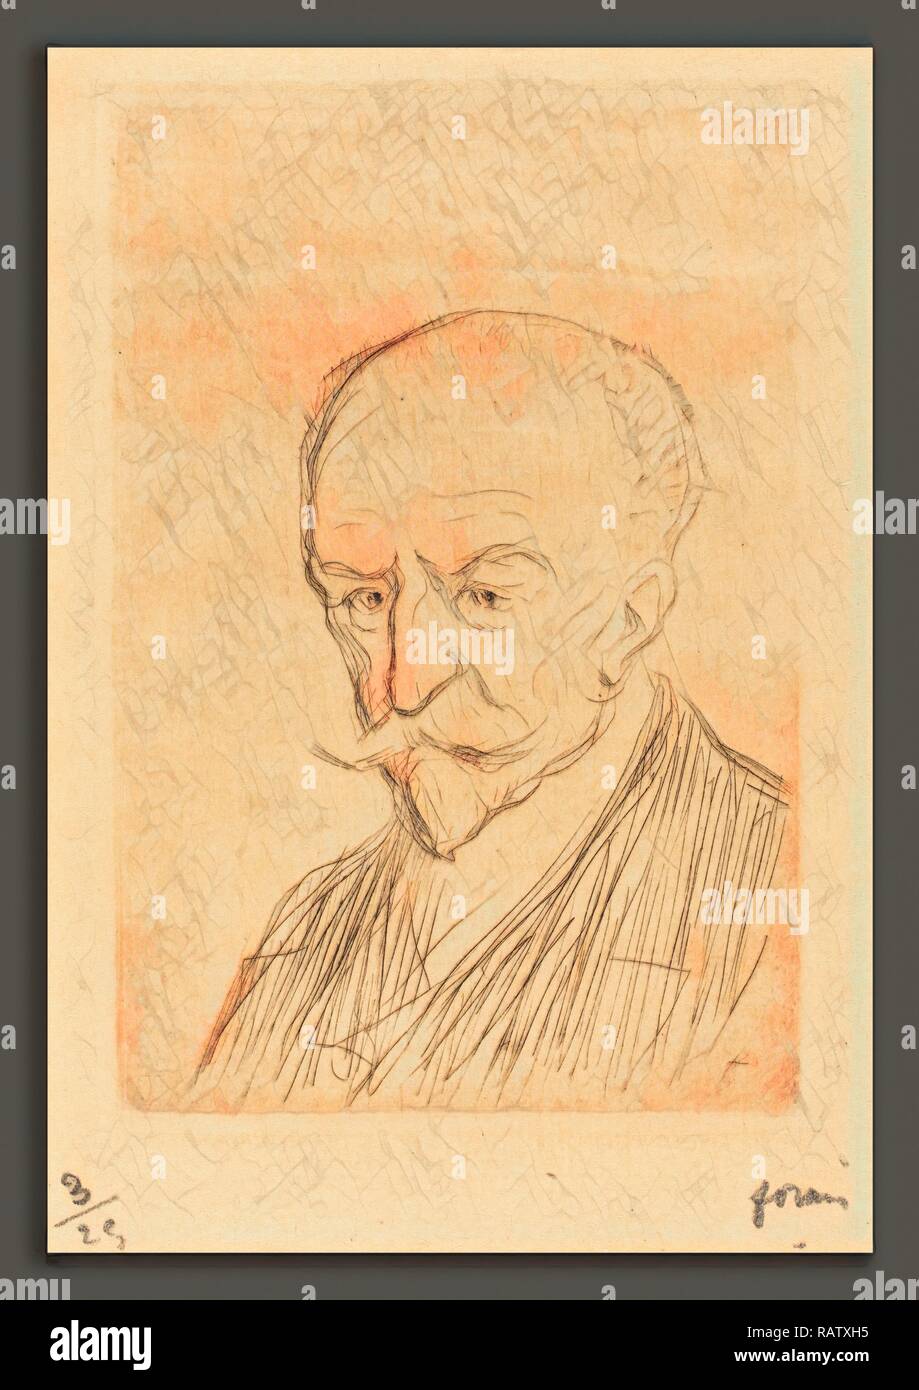 Jean-Louis Forain, J.-K. Huysmans, French, 1852 - 1931, 1909, etching. Reimagined by Gibon. Classic art with a modern reimagined Stock Photo